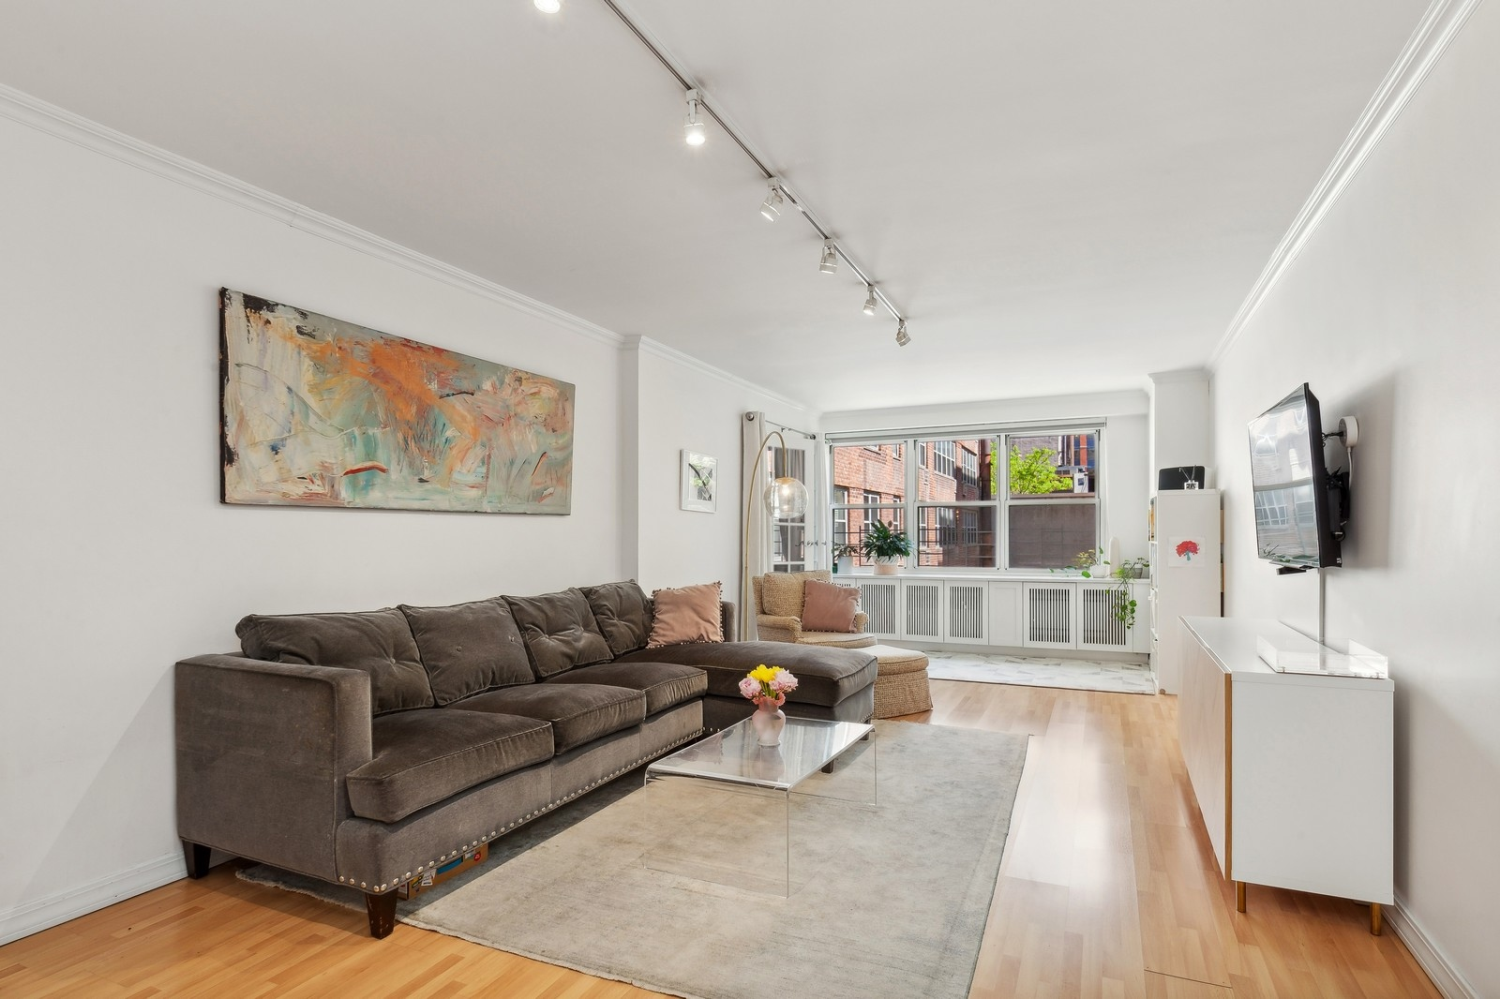 401 East 74th Street 3A, Lenox Hill, Upper East Side, NYC - 2 Bedrooms  
1 Bathrooms  
4 Rooms - 